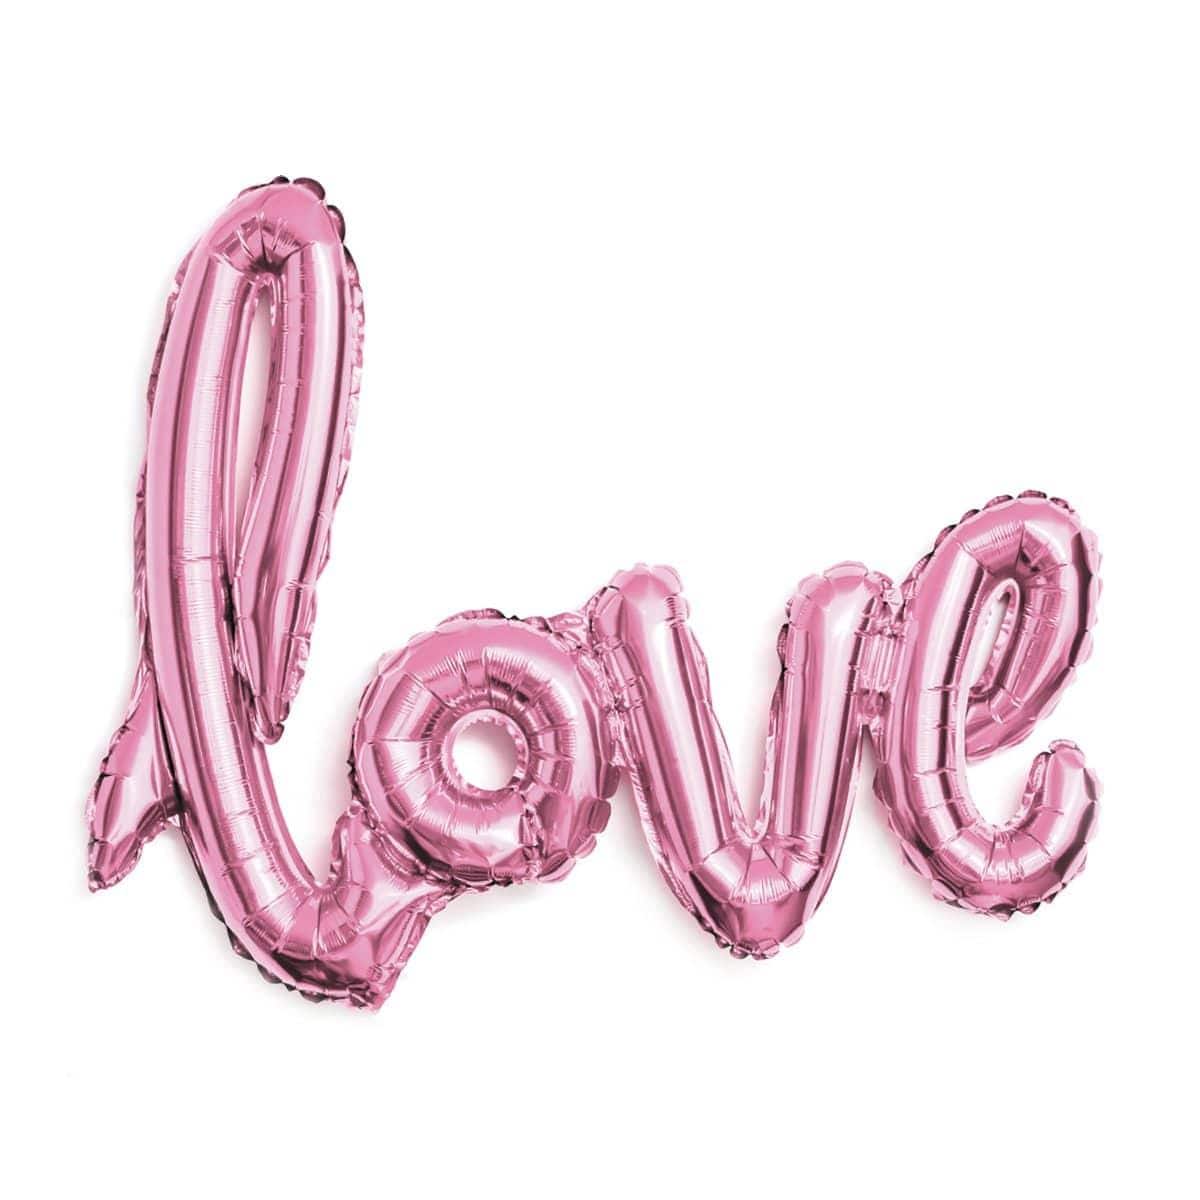 Buy Balloons Rose Love Air Filled Foil Balloon sold at Party Expert